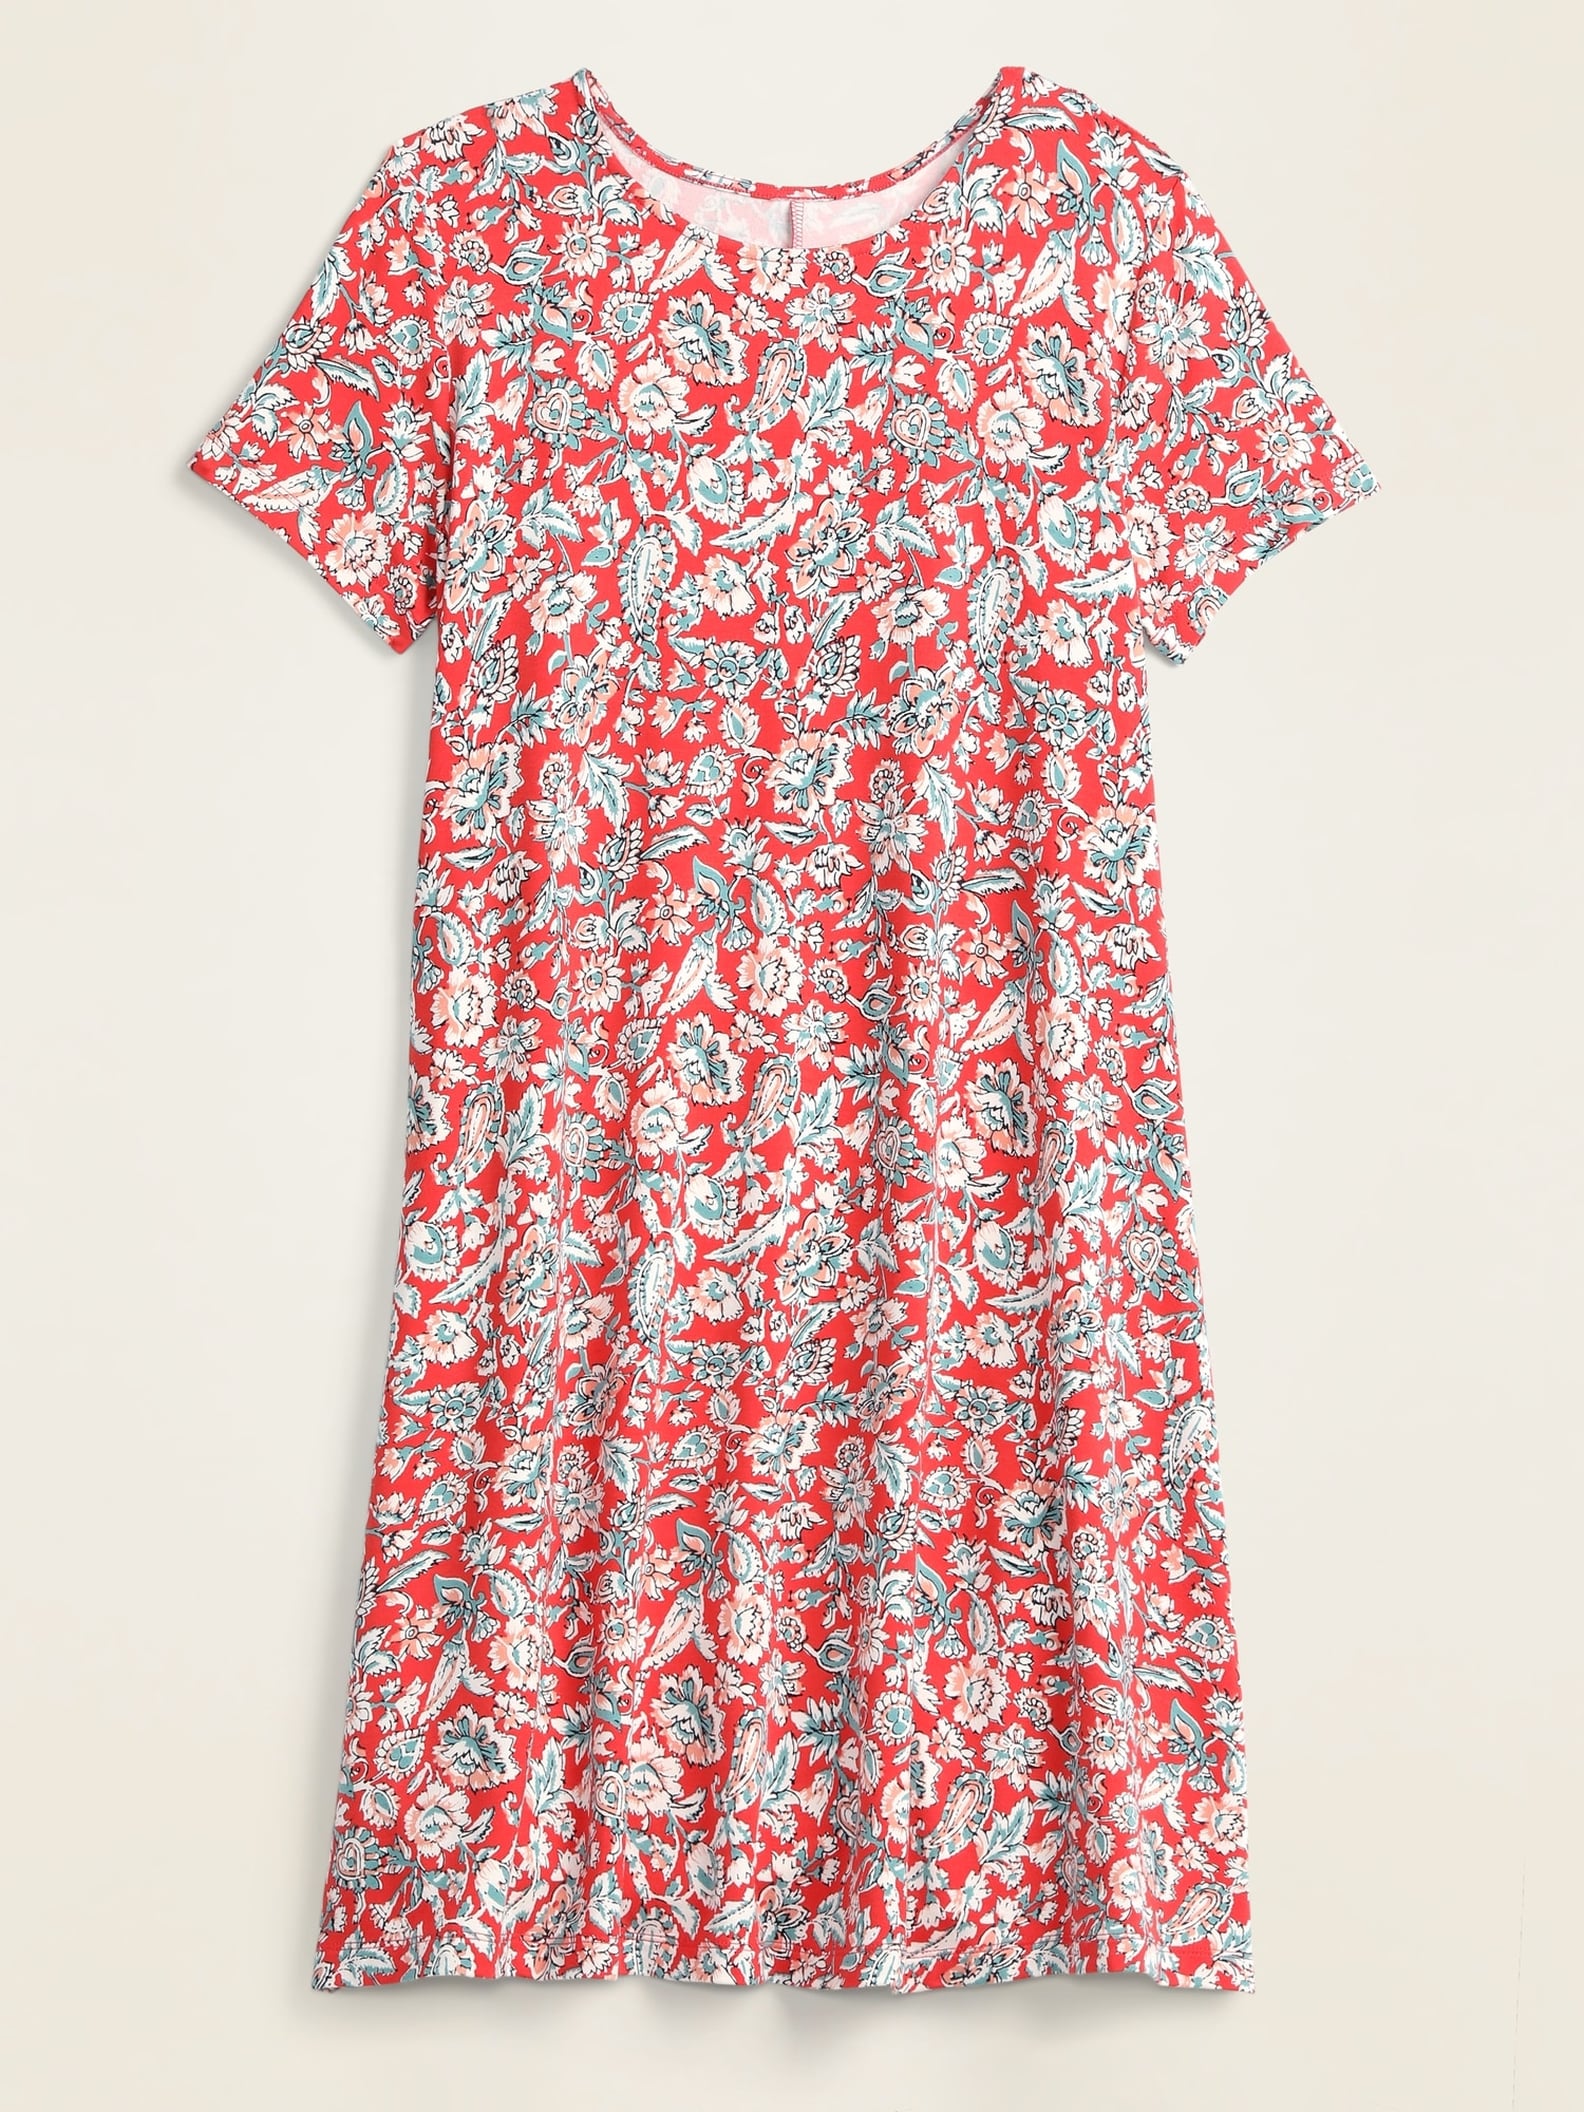 Comfortable Floral Dress at Old Navy | Editor Review | POPSUGAR Fashion